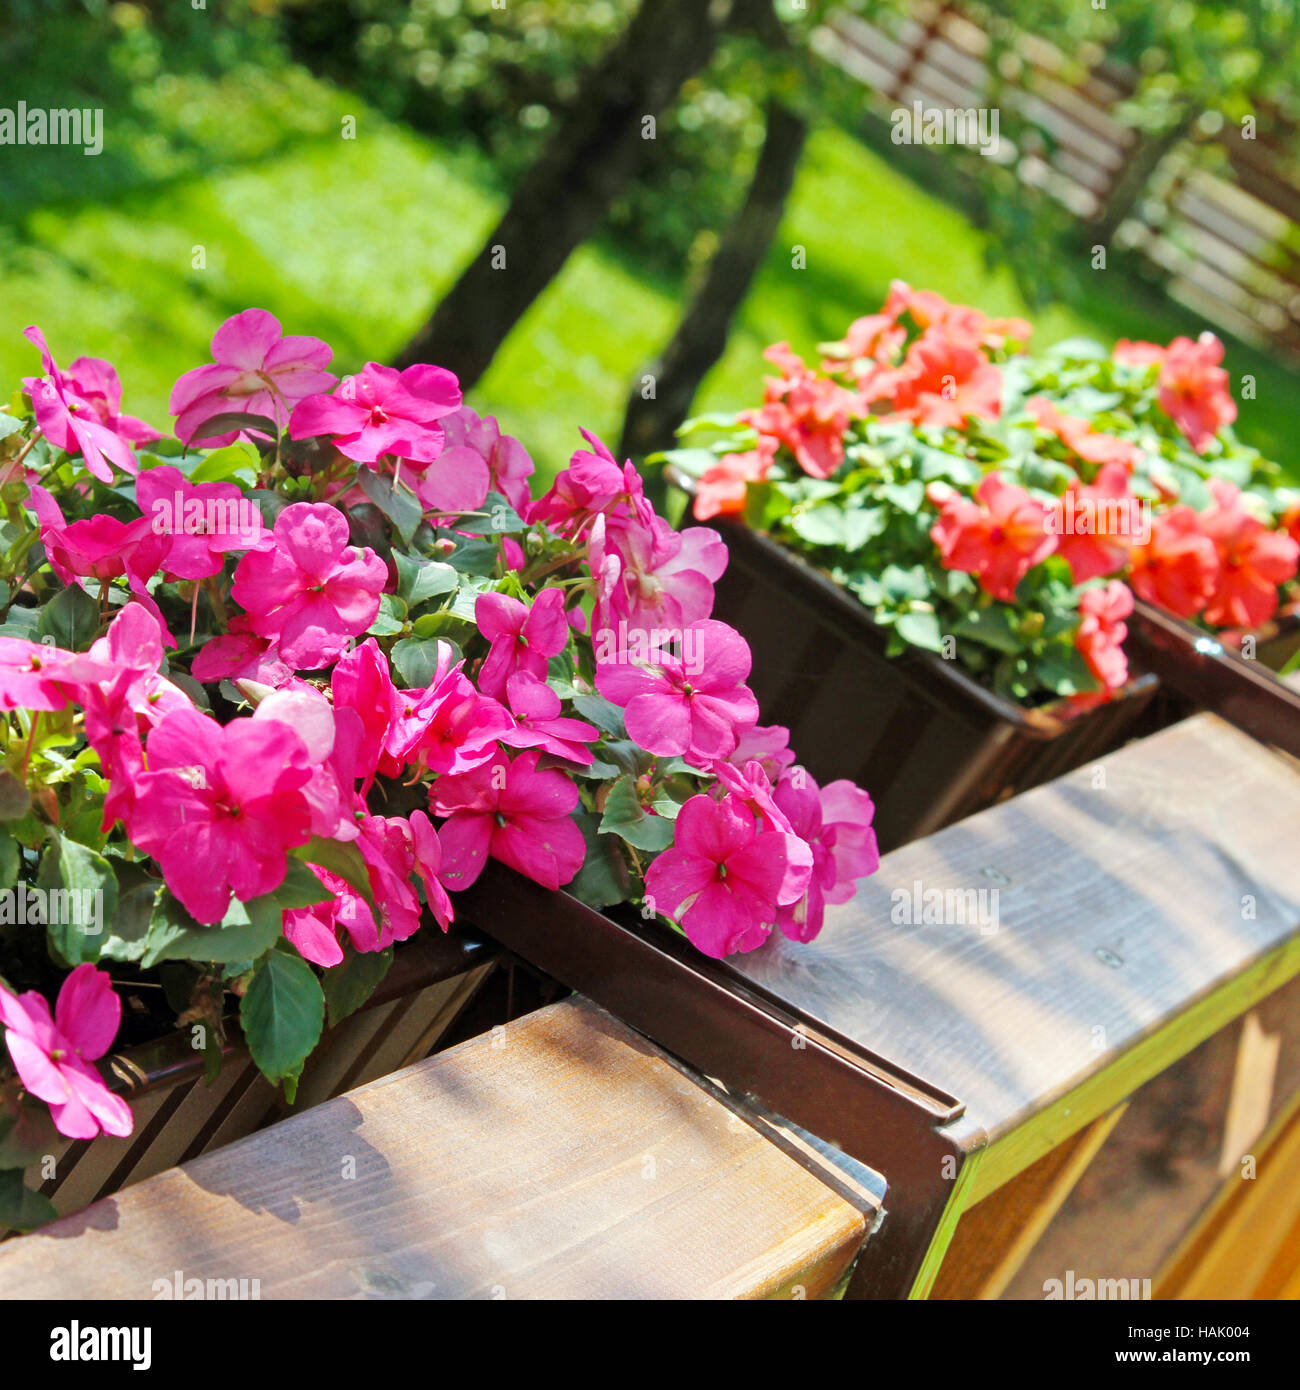 balcony flower boxes filled with flowers Stock Photo